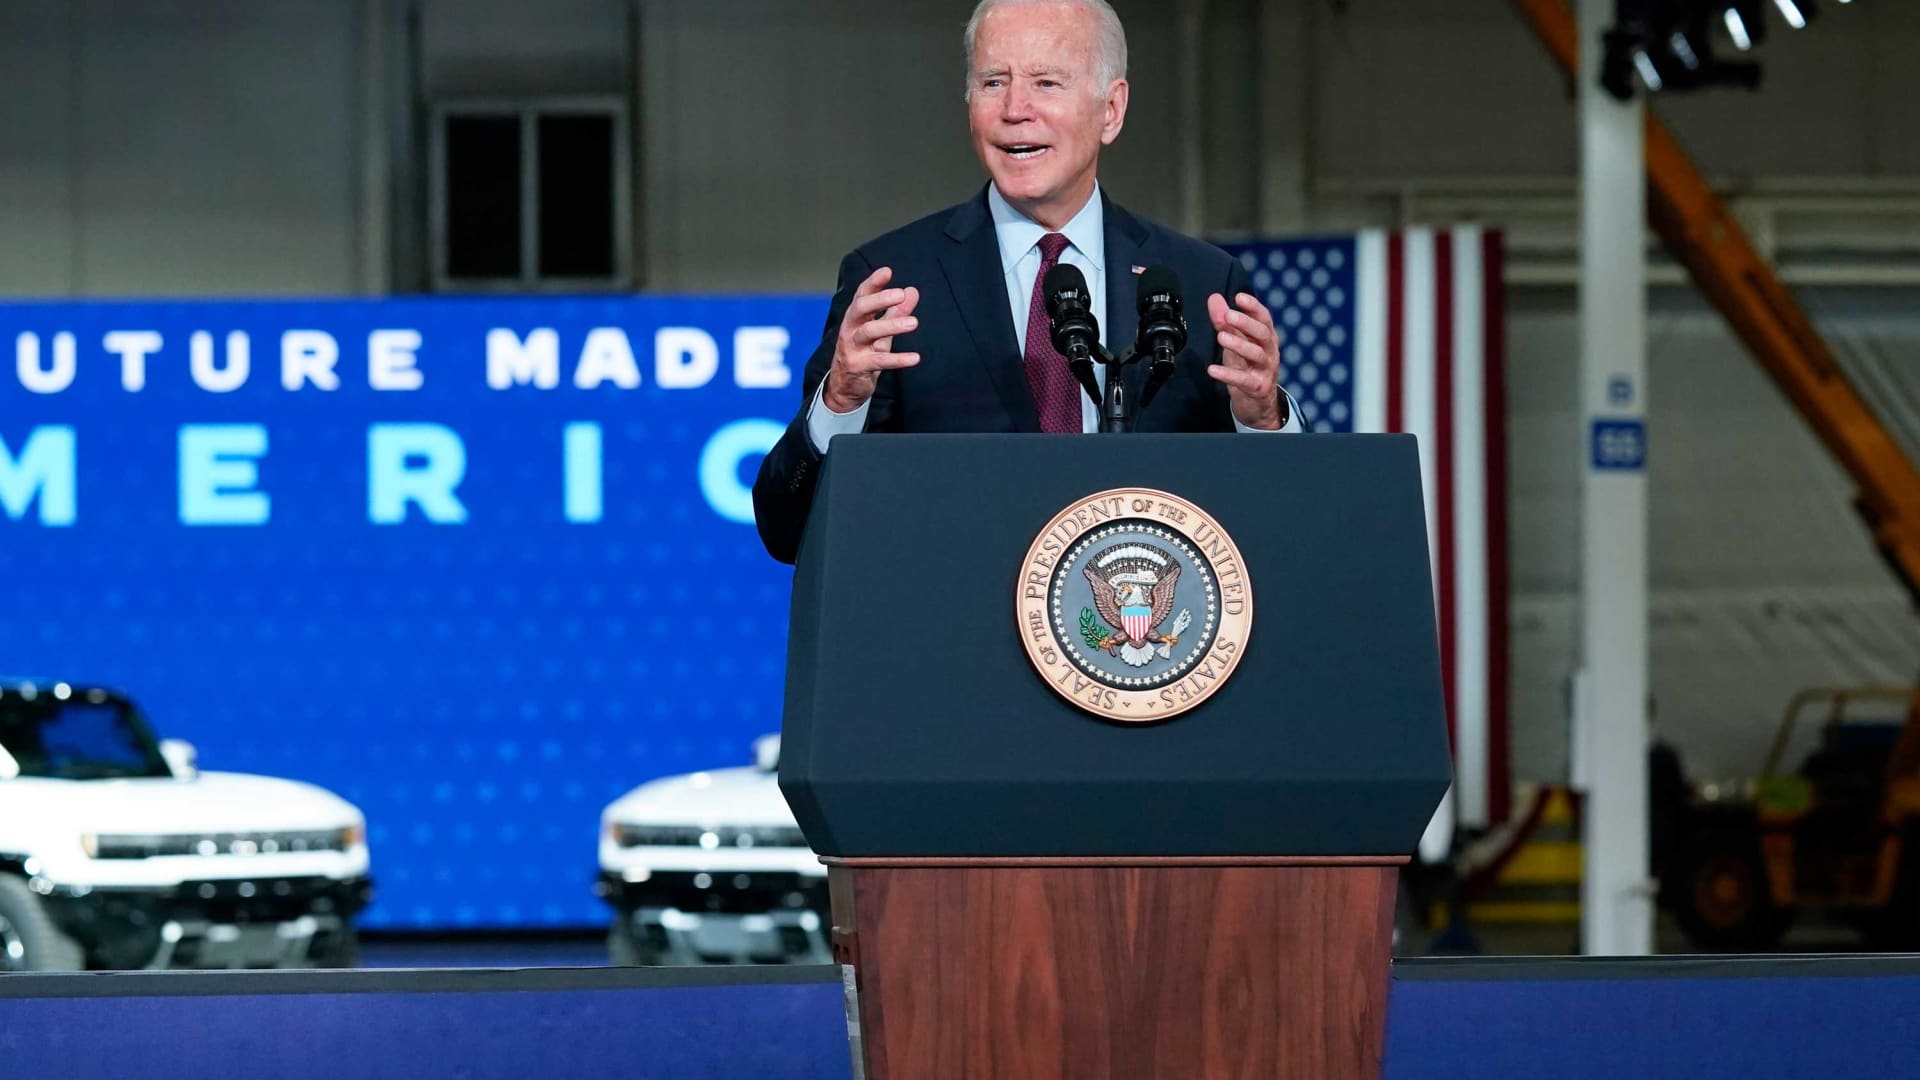 President Joe Biden speaks during a visit to the General Motors Factory ZERO electric vehicle assembly plant, Wednesday, Nov. 17, 2021, in Detroit.